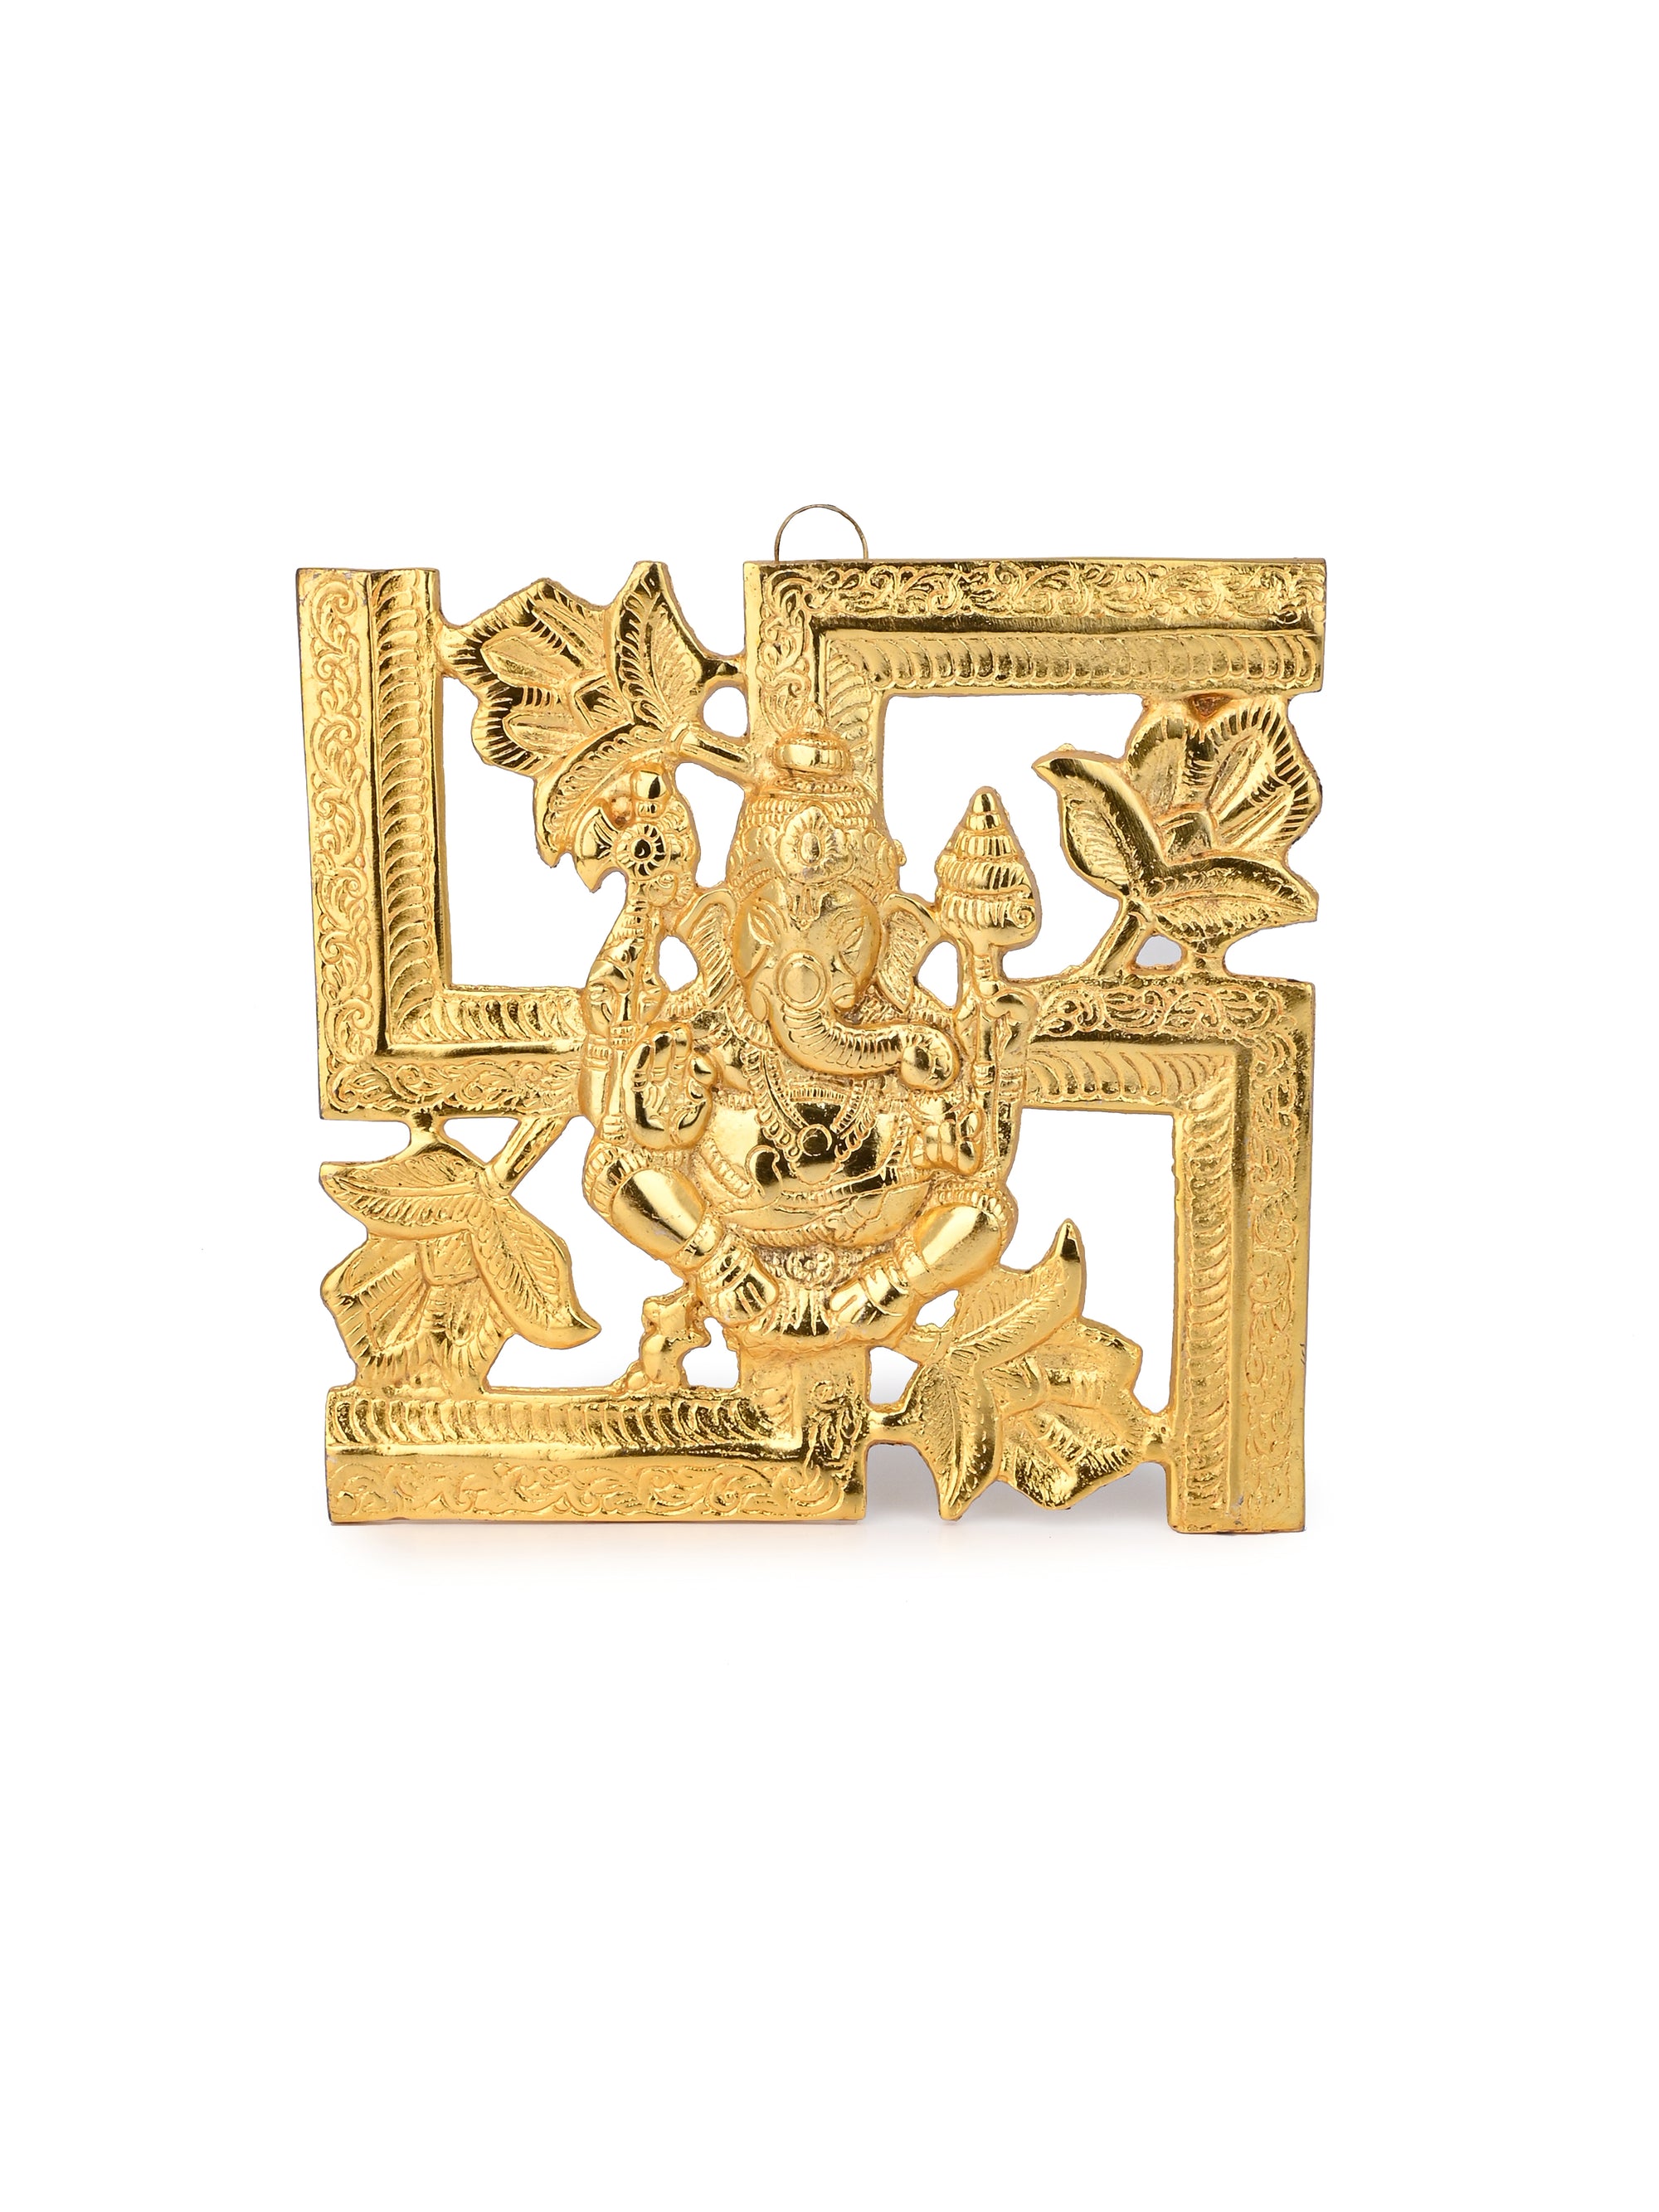 Metal Crafted Golden Swastik Ganesh Hanging Wall Decor - 8 inches